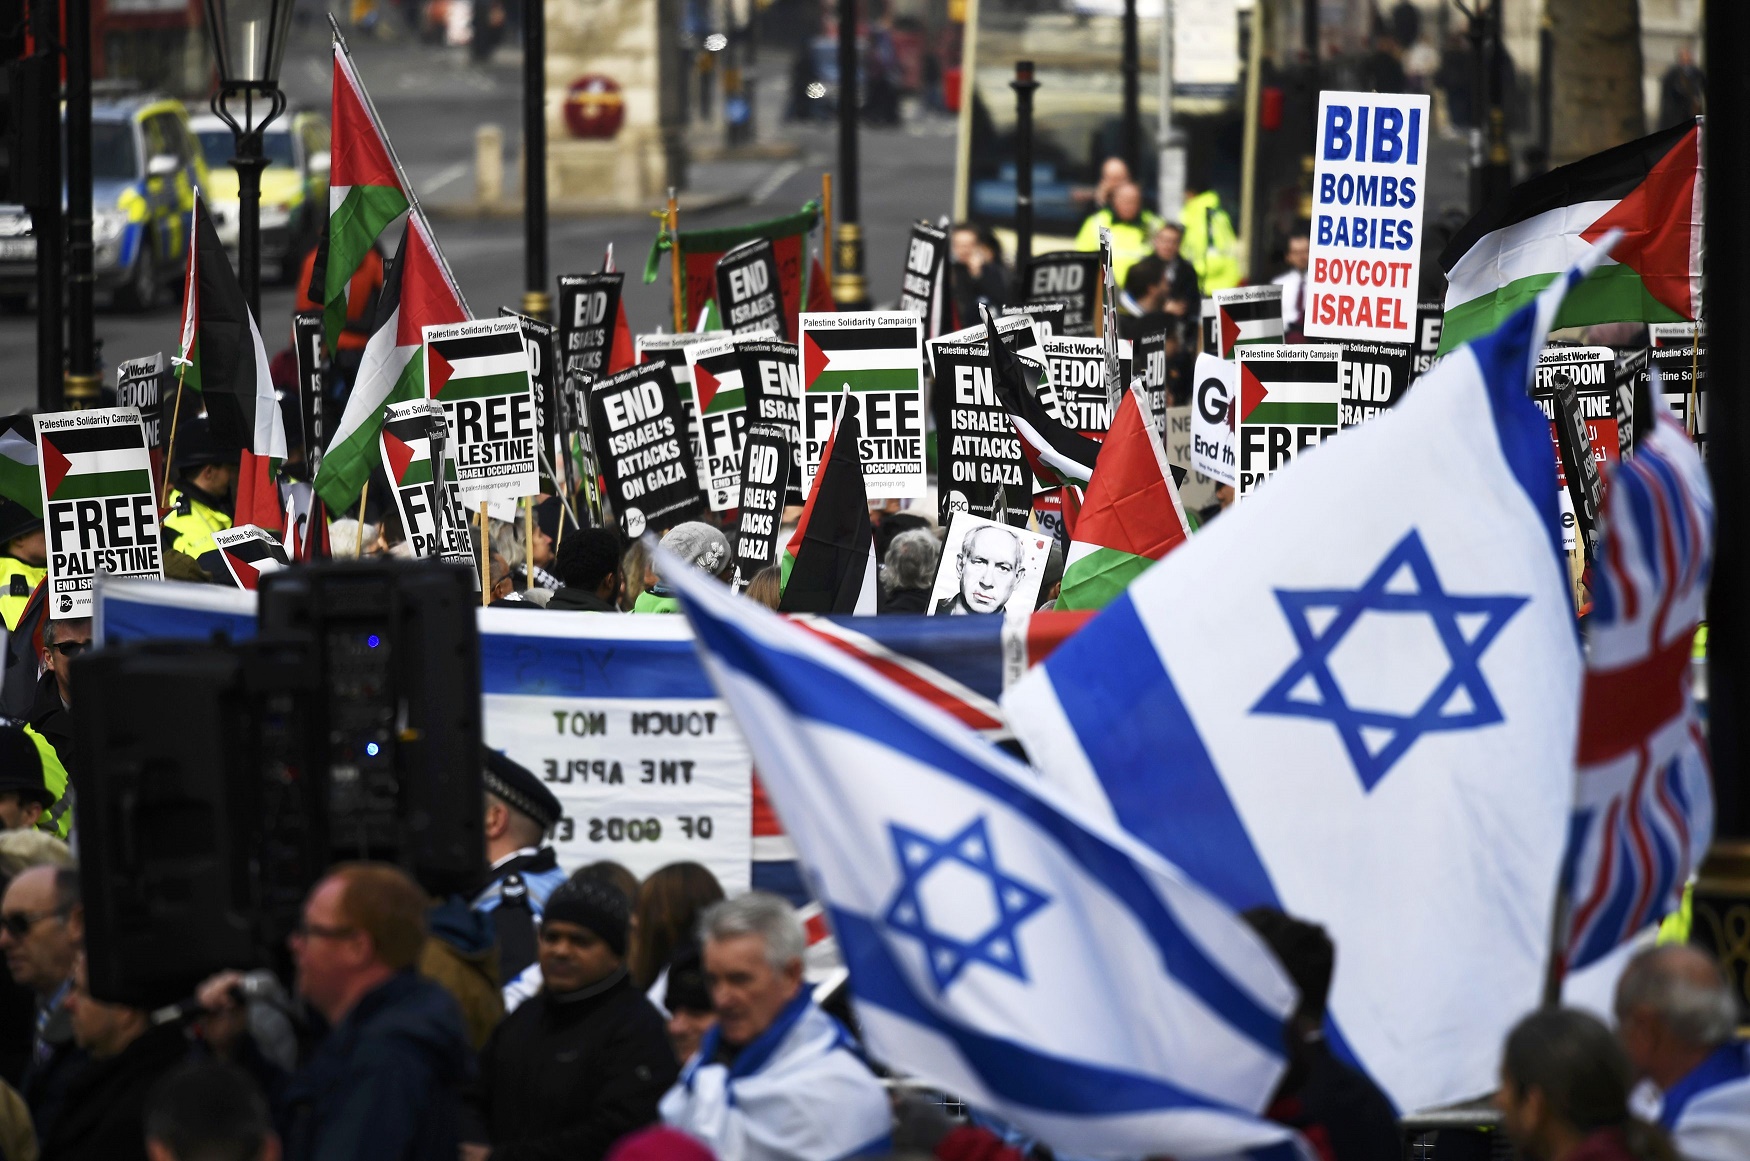 Pro-Palestinian protesters are flanked by supporters of Israel at protests near 10 Downing Street (Reuters)